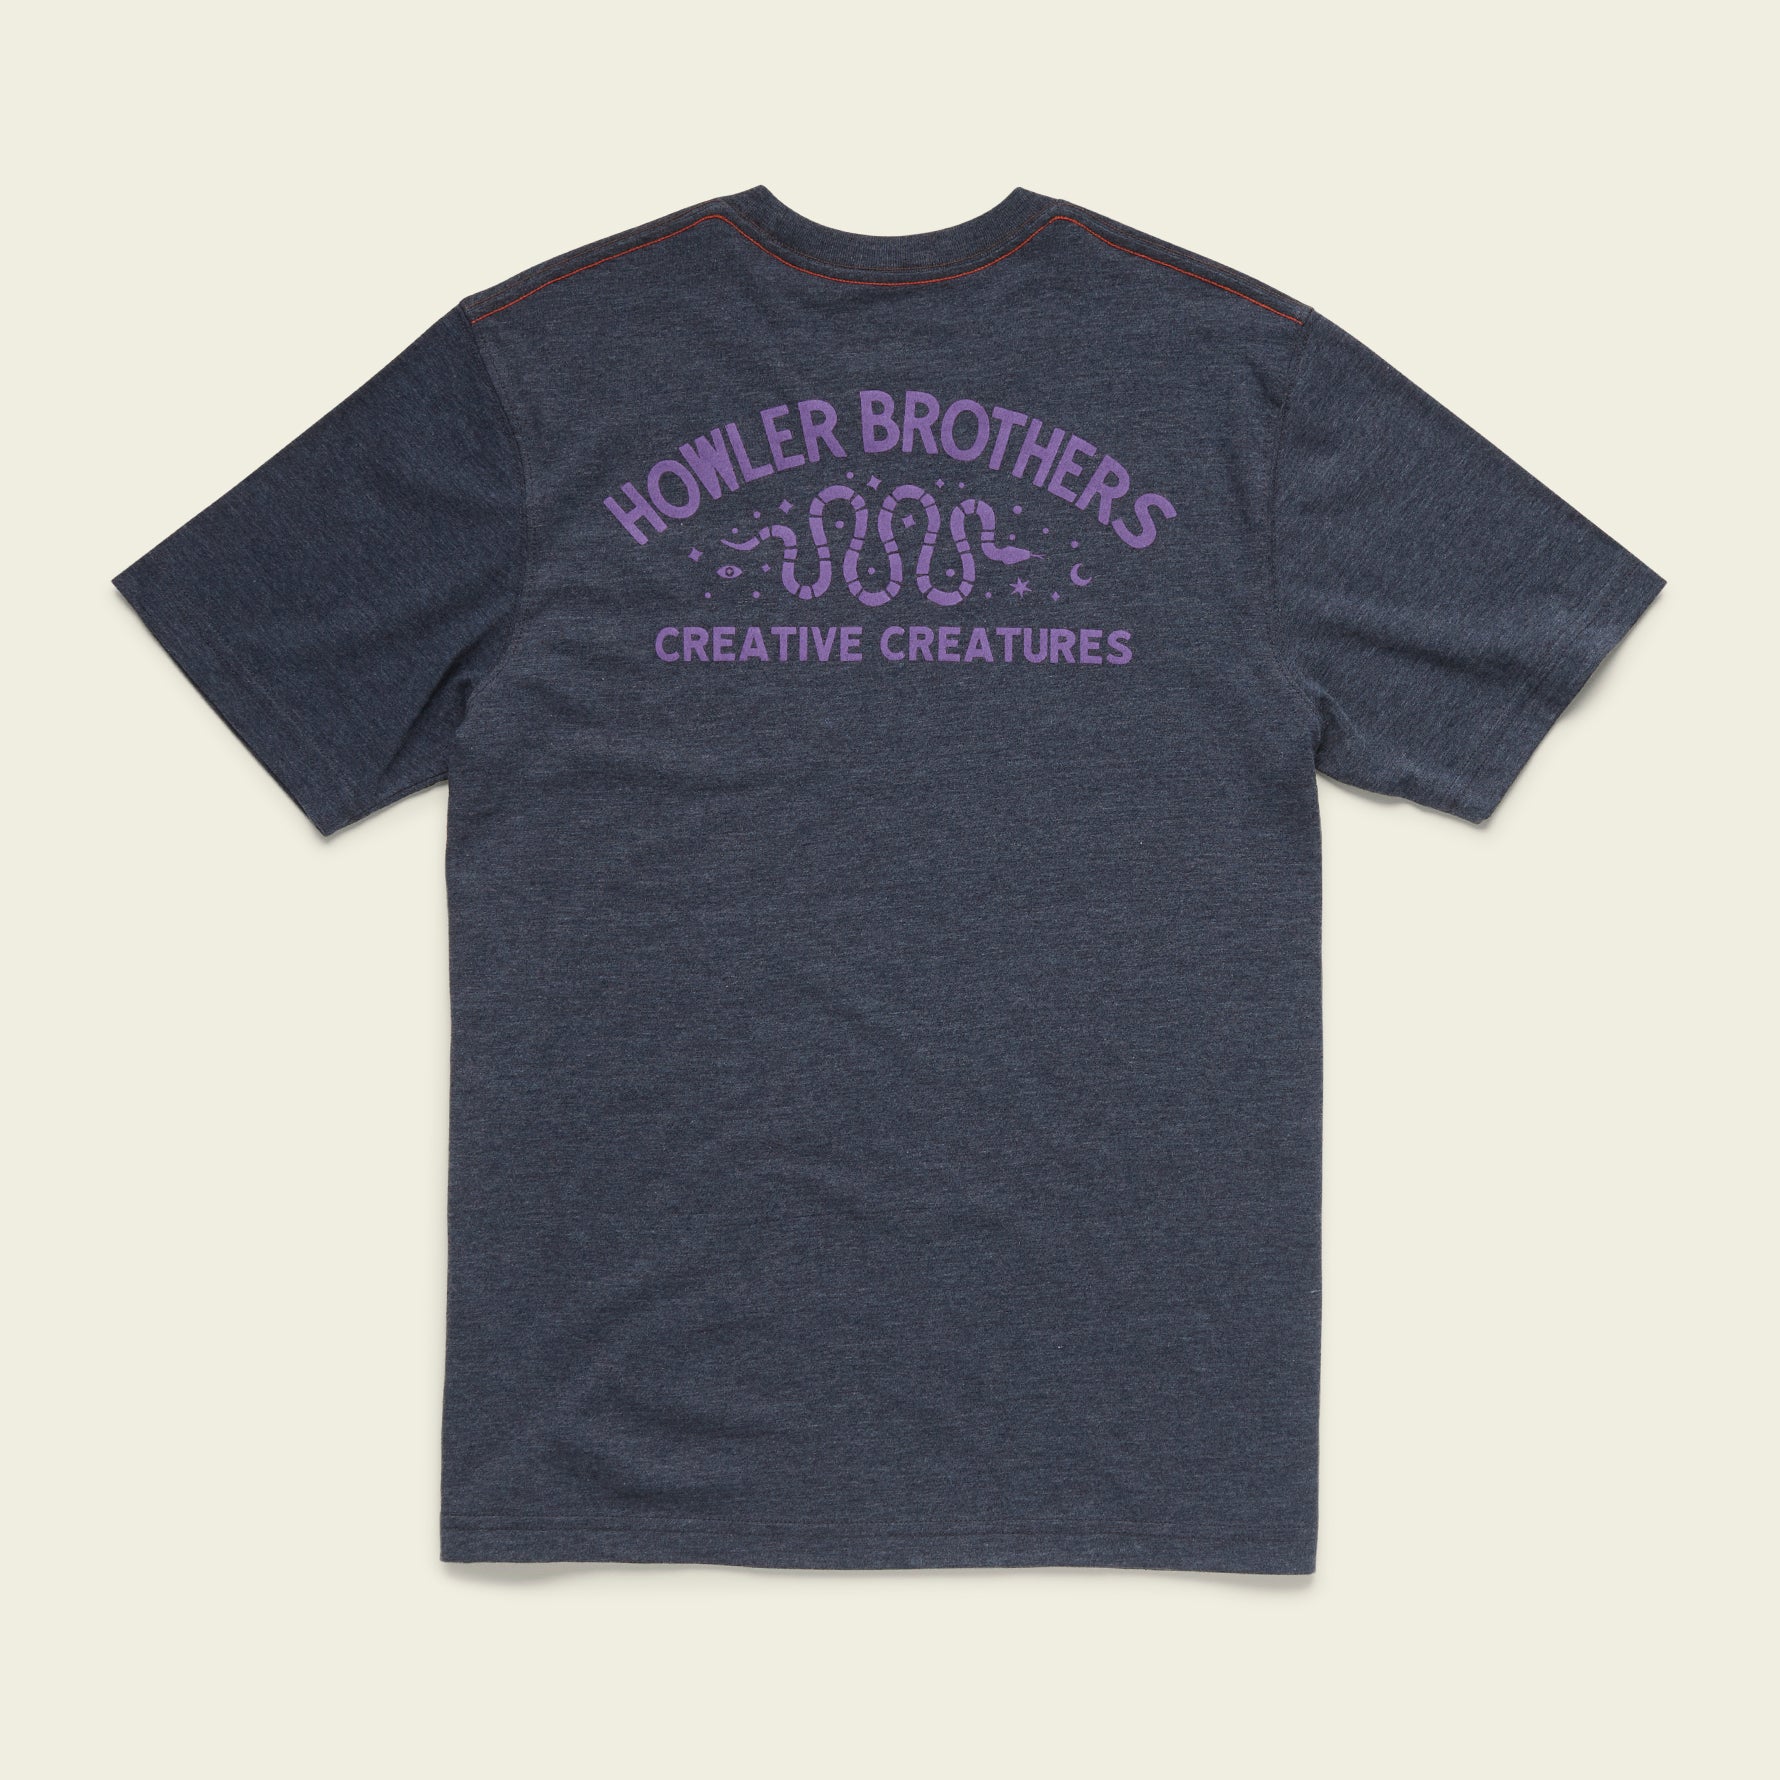 Howler Brothers Creative Creatures Snake Pocket T-Shirt,